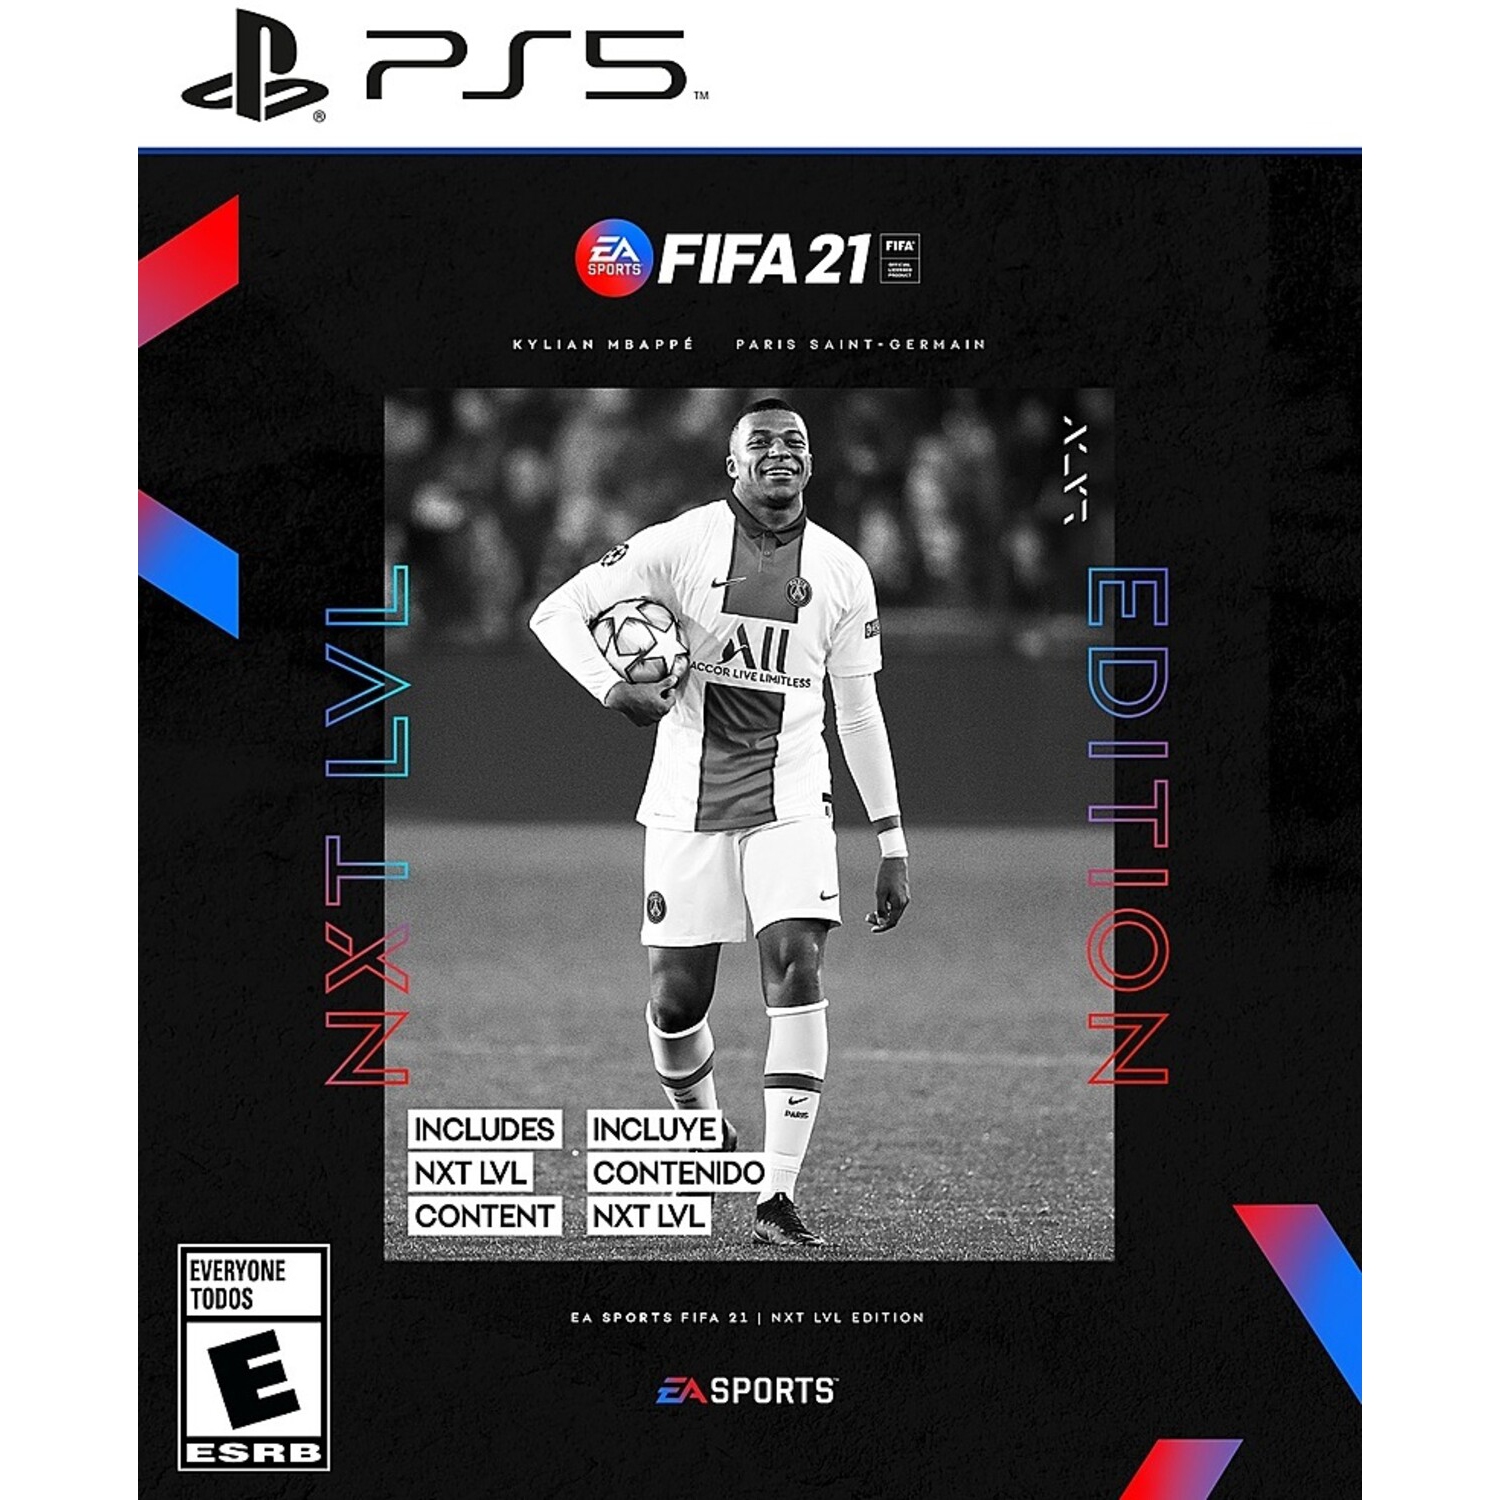 FIFA 21 NEXT LEVEL for PlayStation 5 [VIDEOGAMES] Playstation 5